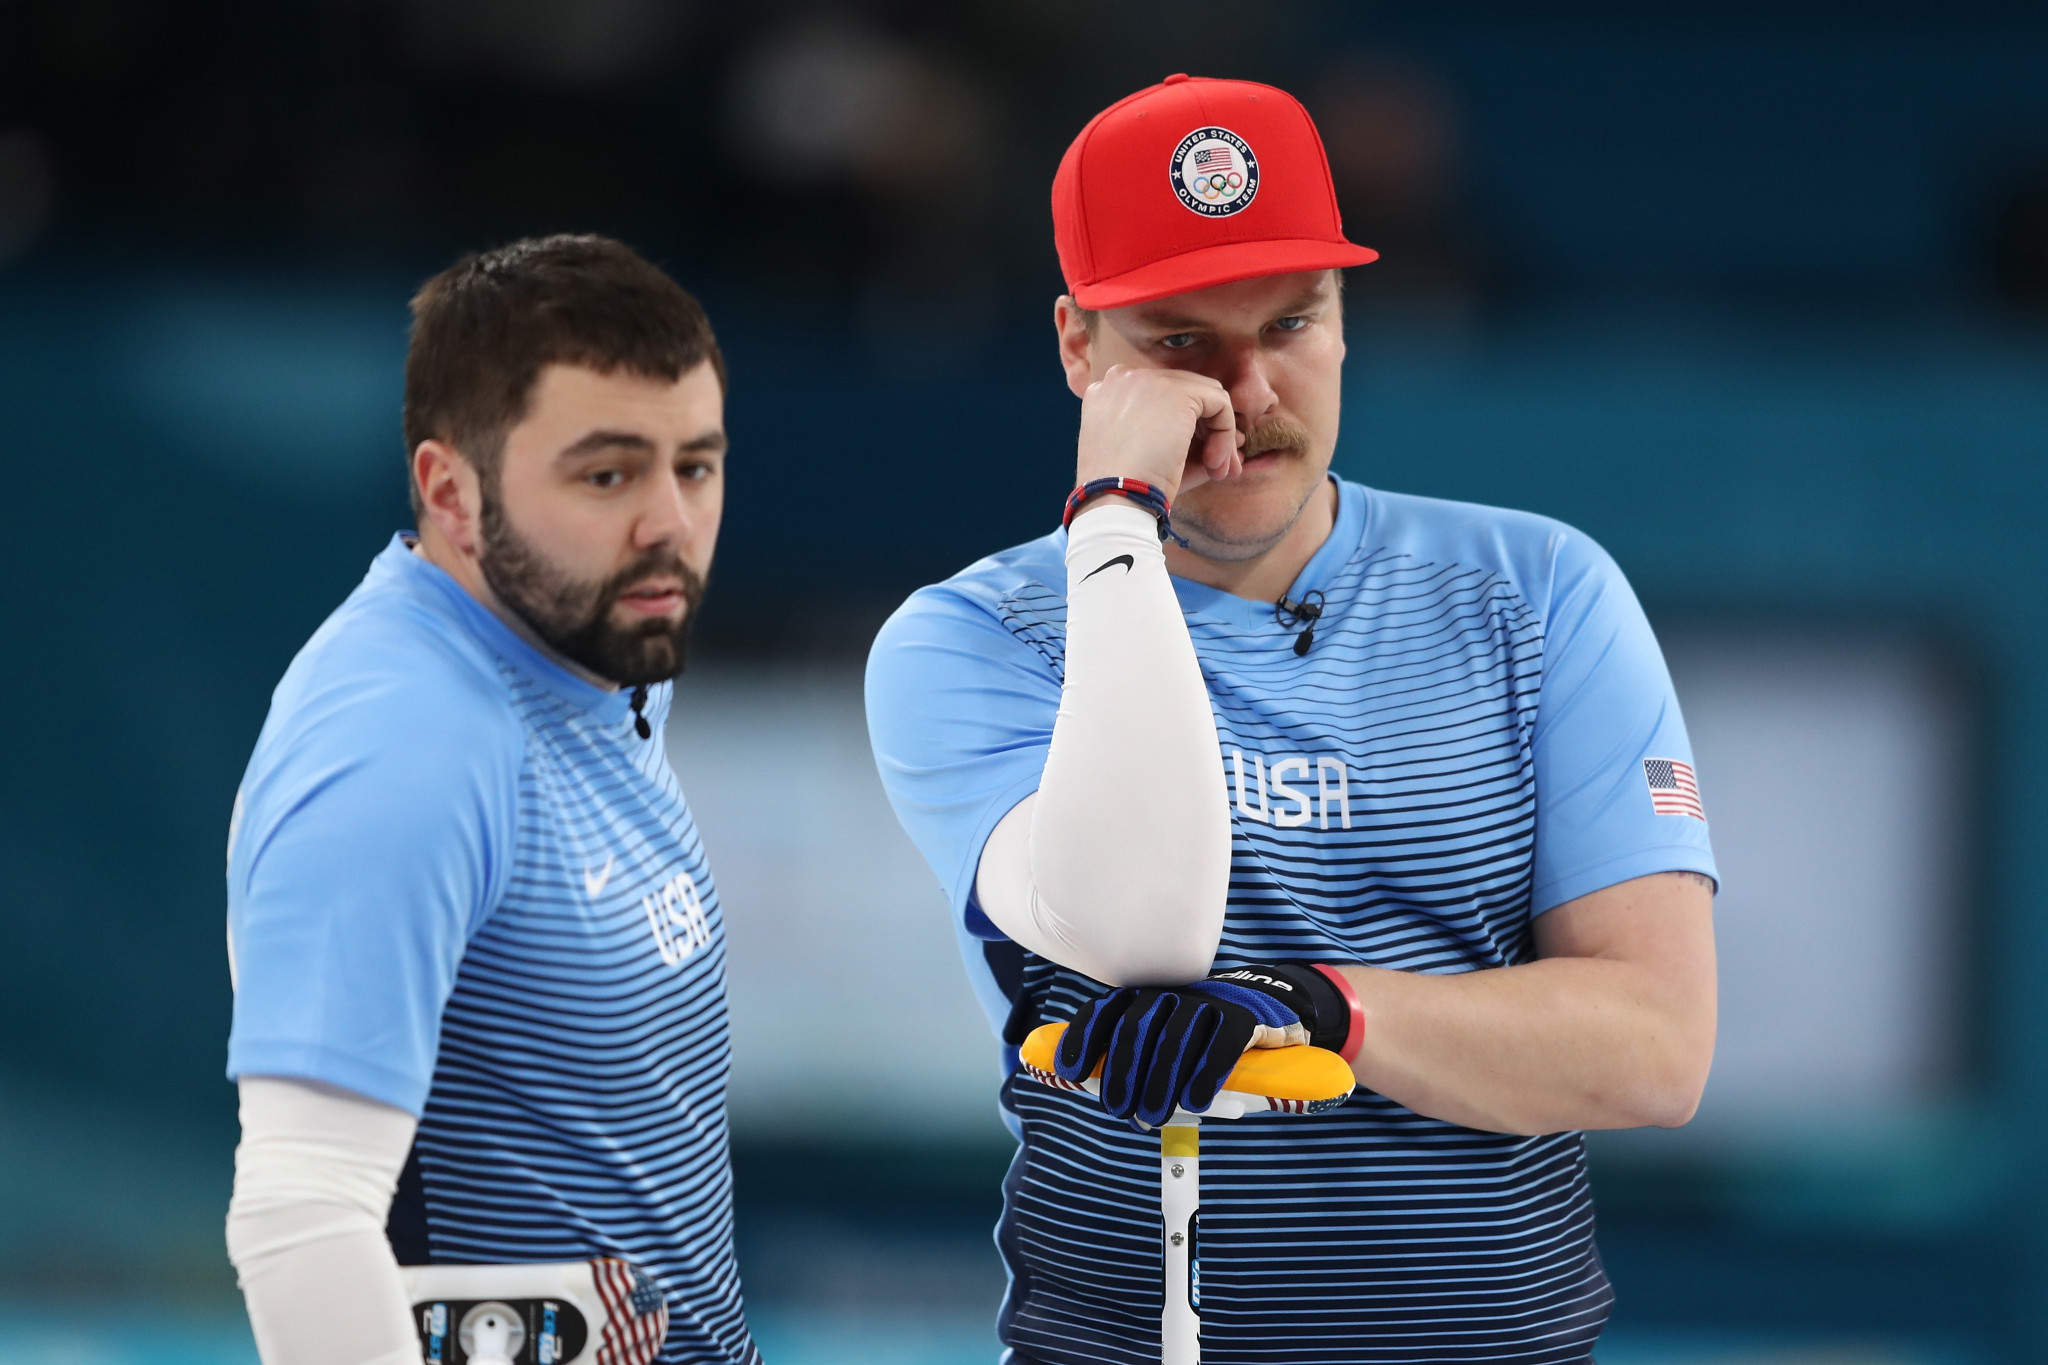 Pyeongchang 2018 curling champion Landsteiner to be reunited with Olympic ring lost on California beach